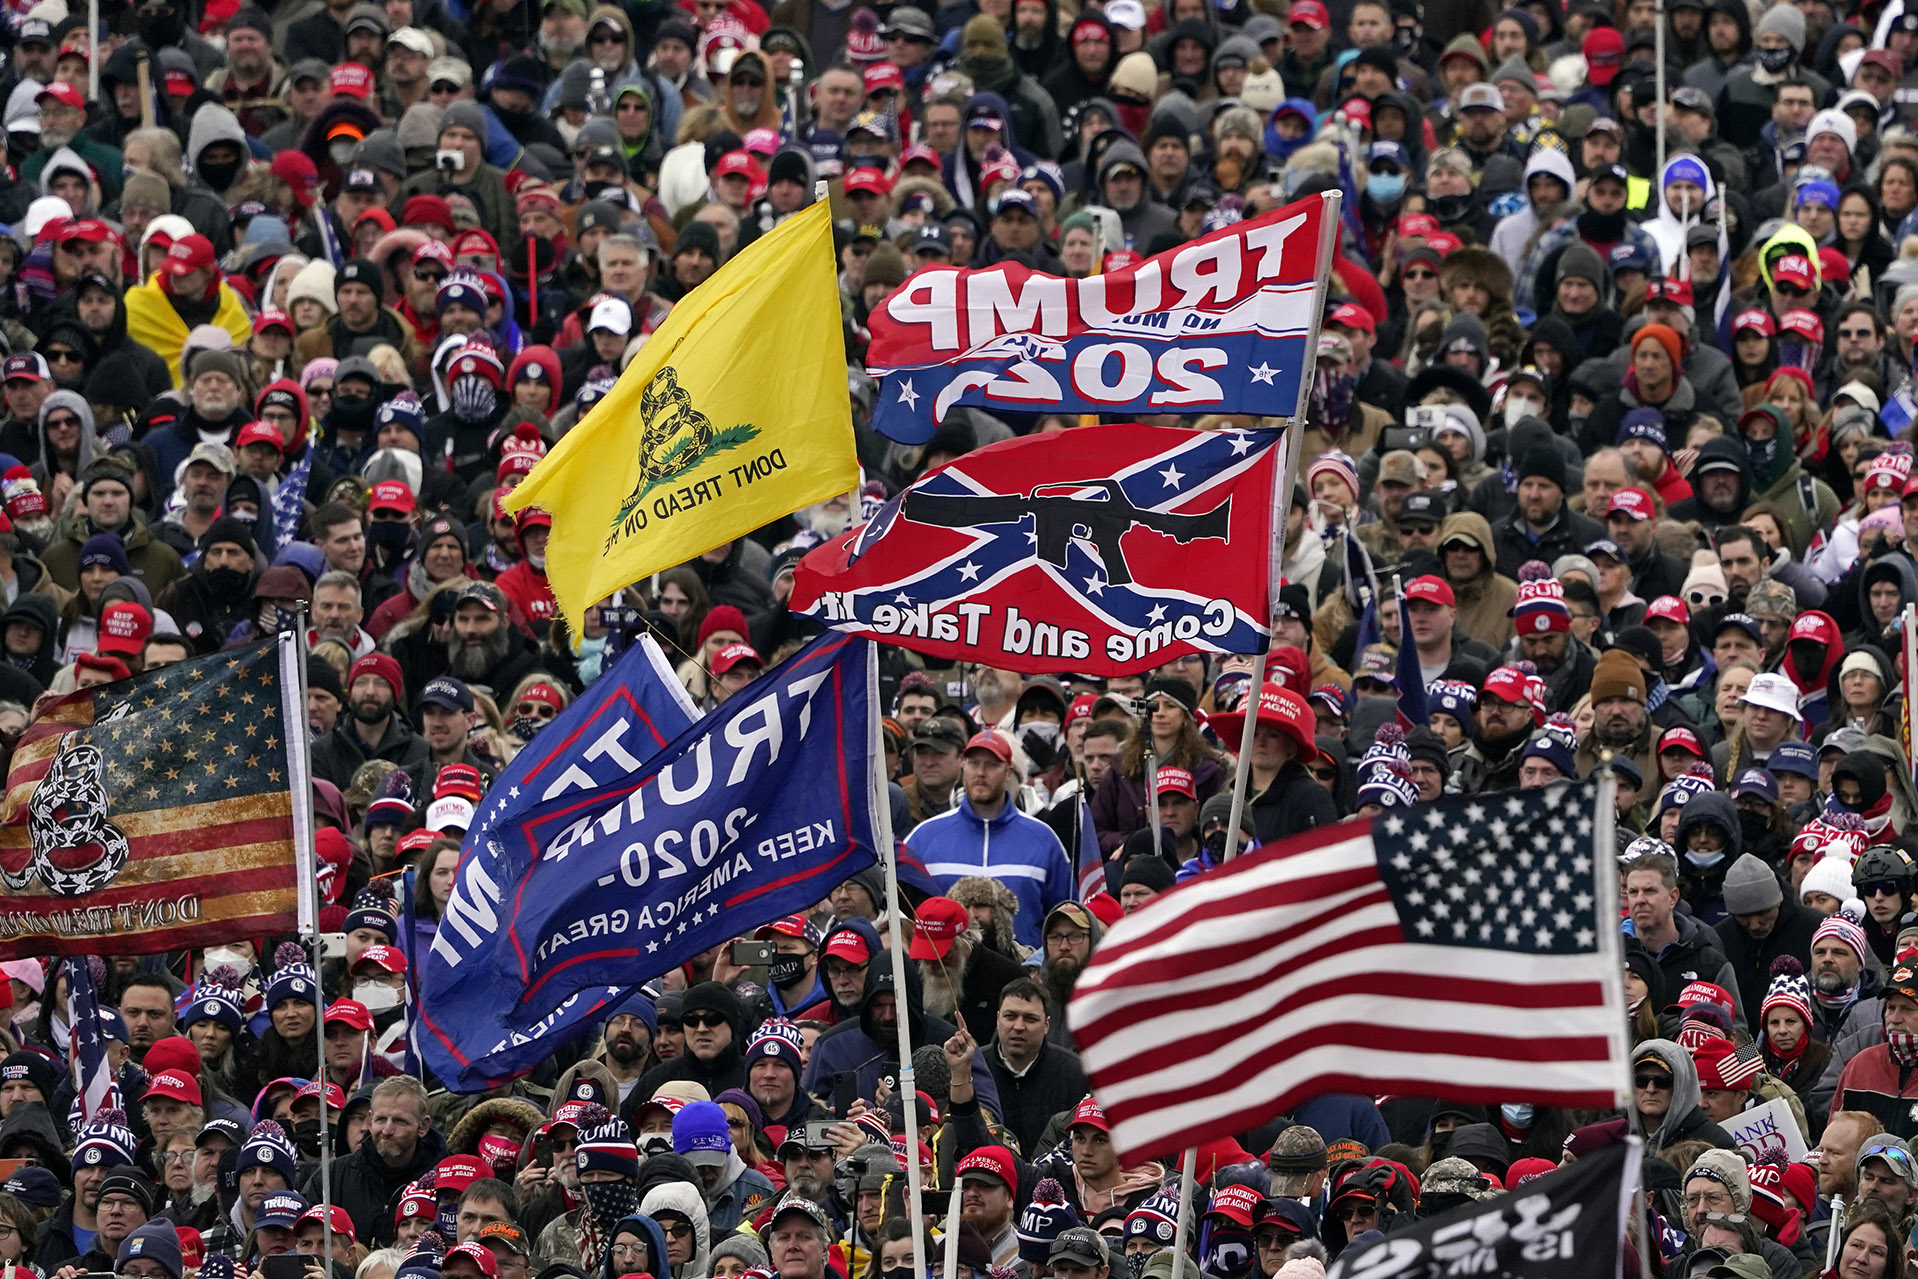 FILE In this Wednesday, Jan. 6, 2021, file photo, supporters listen as President Donald Trump speaks as a Confederate-themed and other flags flutter in the wind during a rally in Washington. War-like imagery has begun to take hold in mainstream Republican political circles in the wake of the deadly attack on the U.S. Capitol, with some elected officials and party leaders rejecting calls to tone down their rhetoric contemplating a second civil war. (AP Photo/Evan Vucci, File)